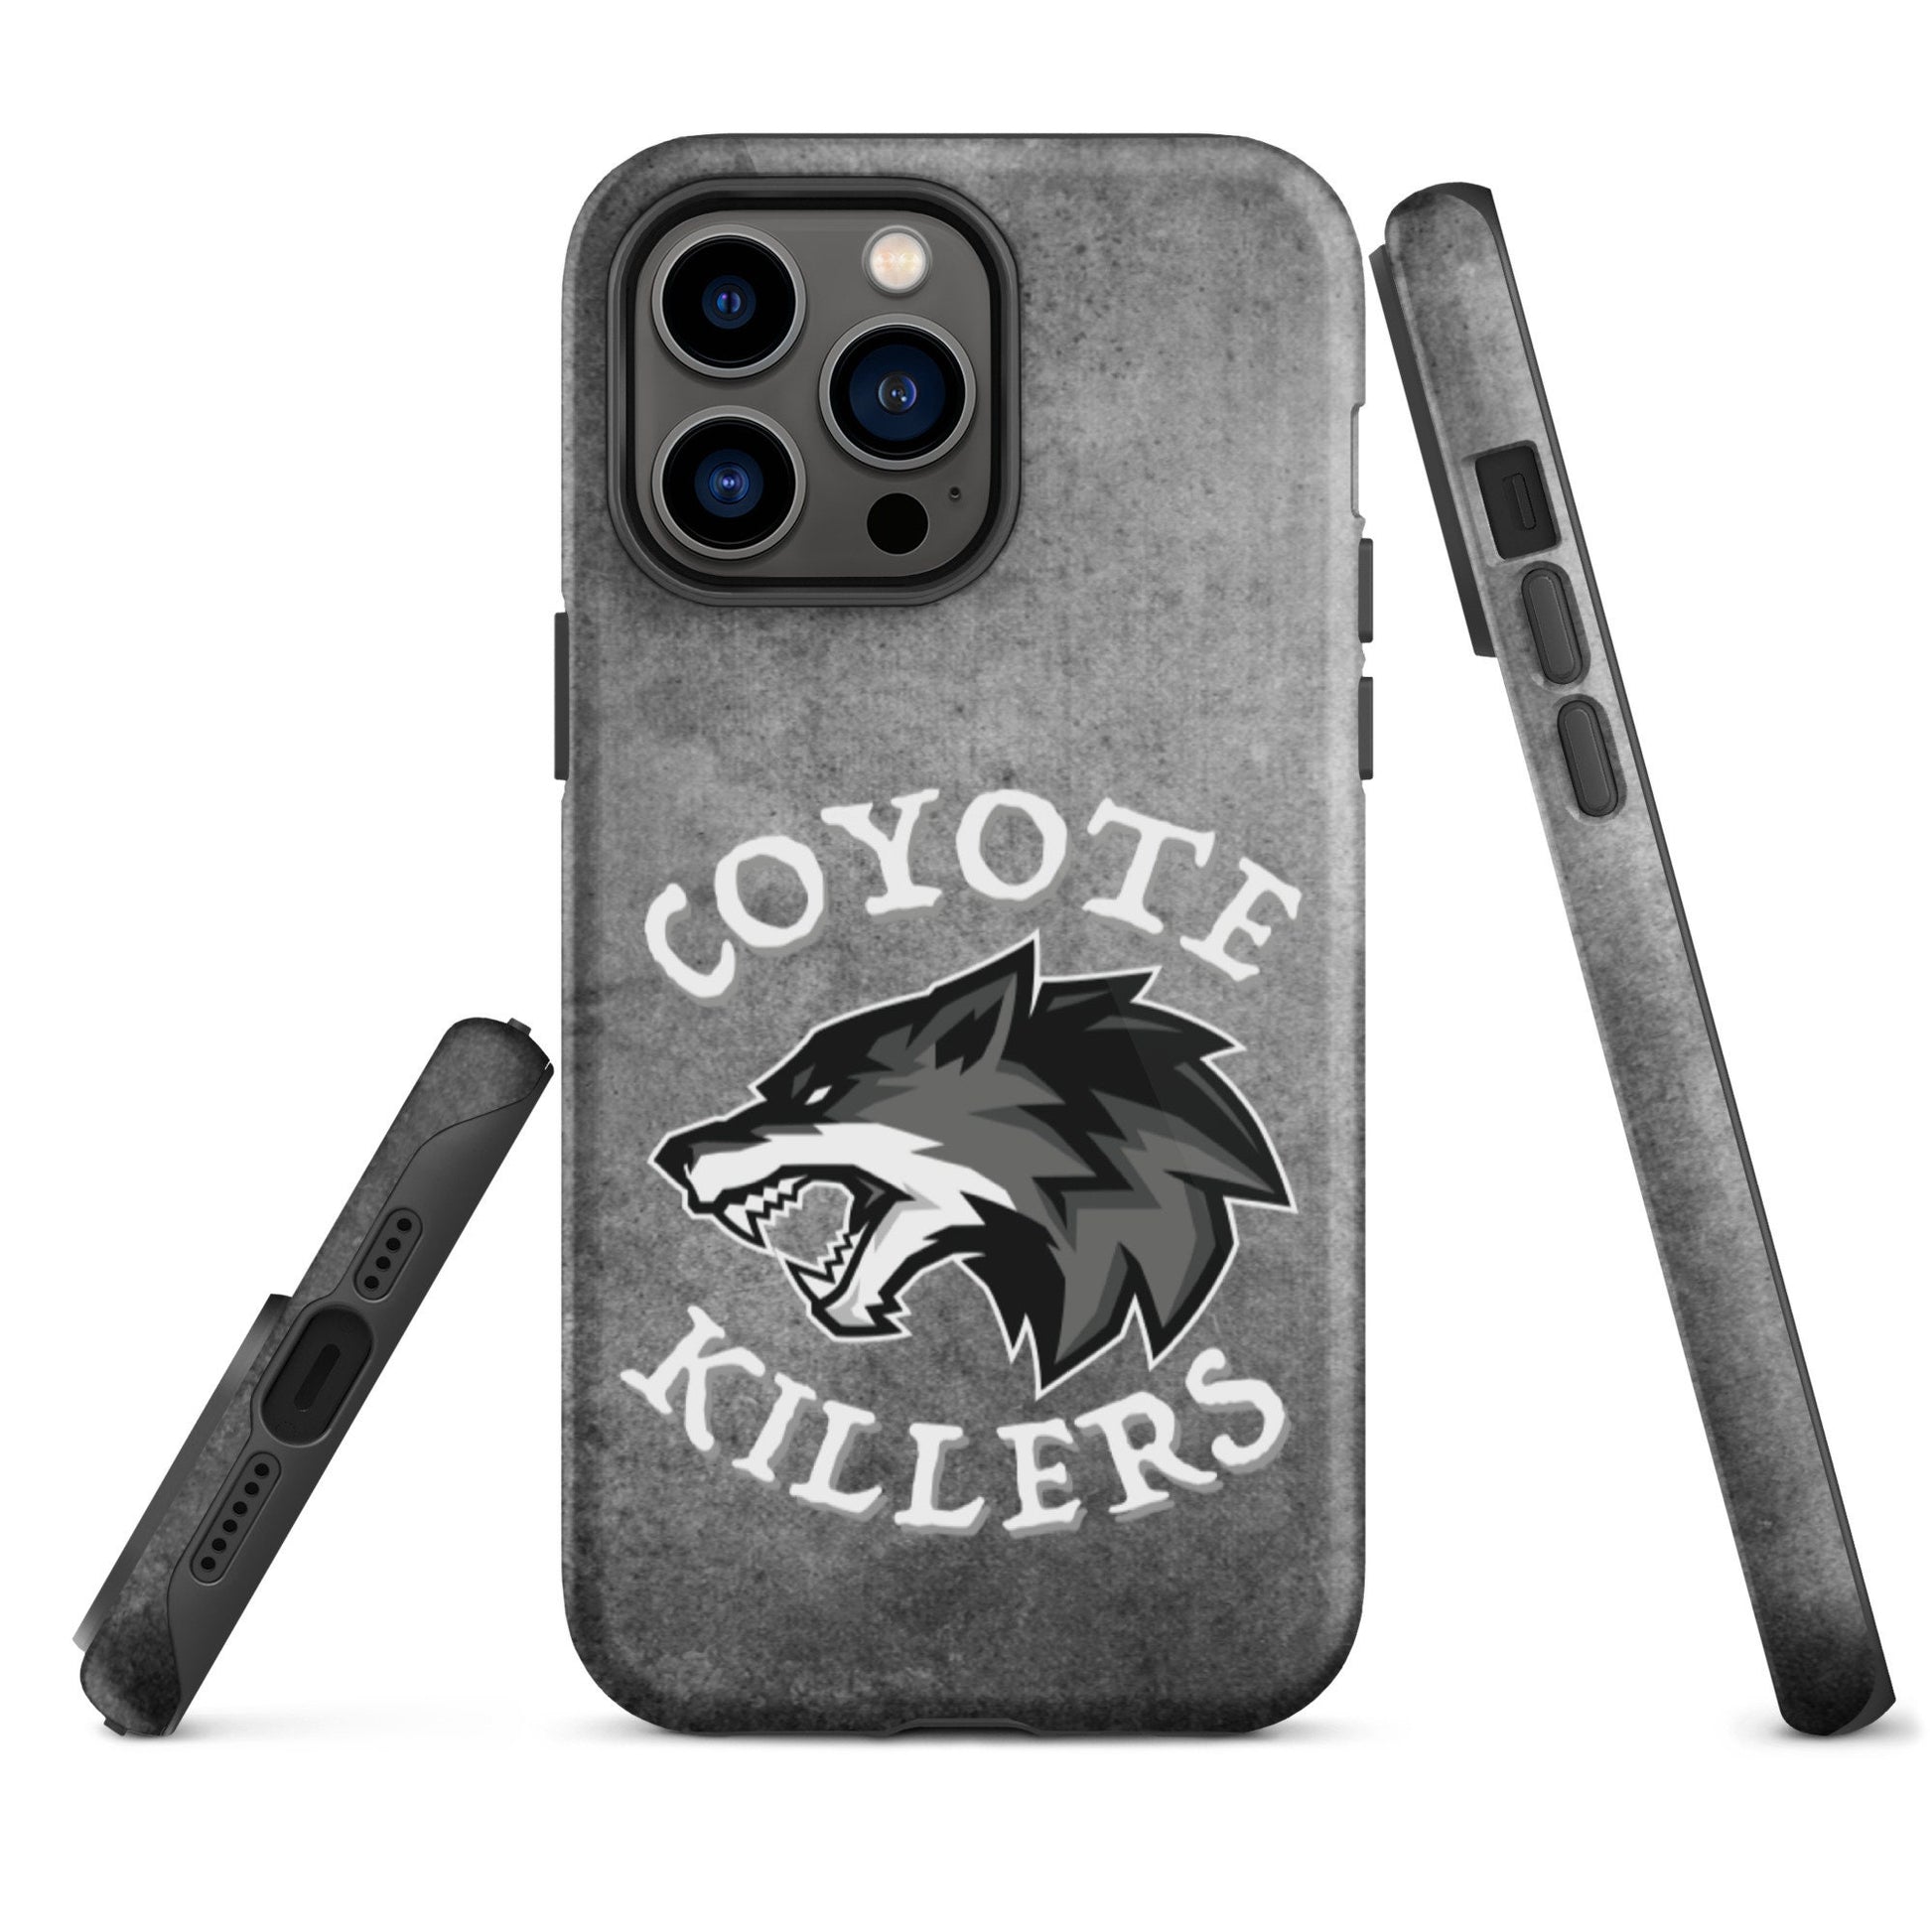 Coyote Killers Tough iPhone case